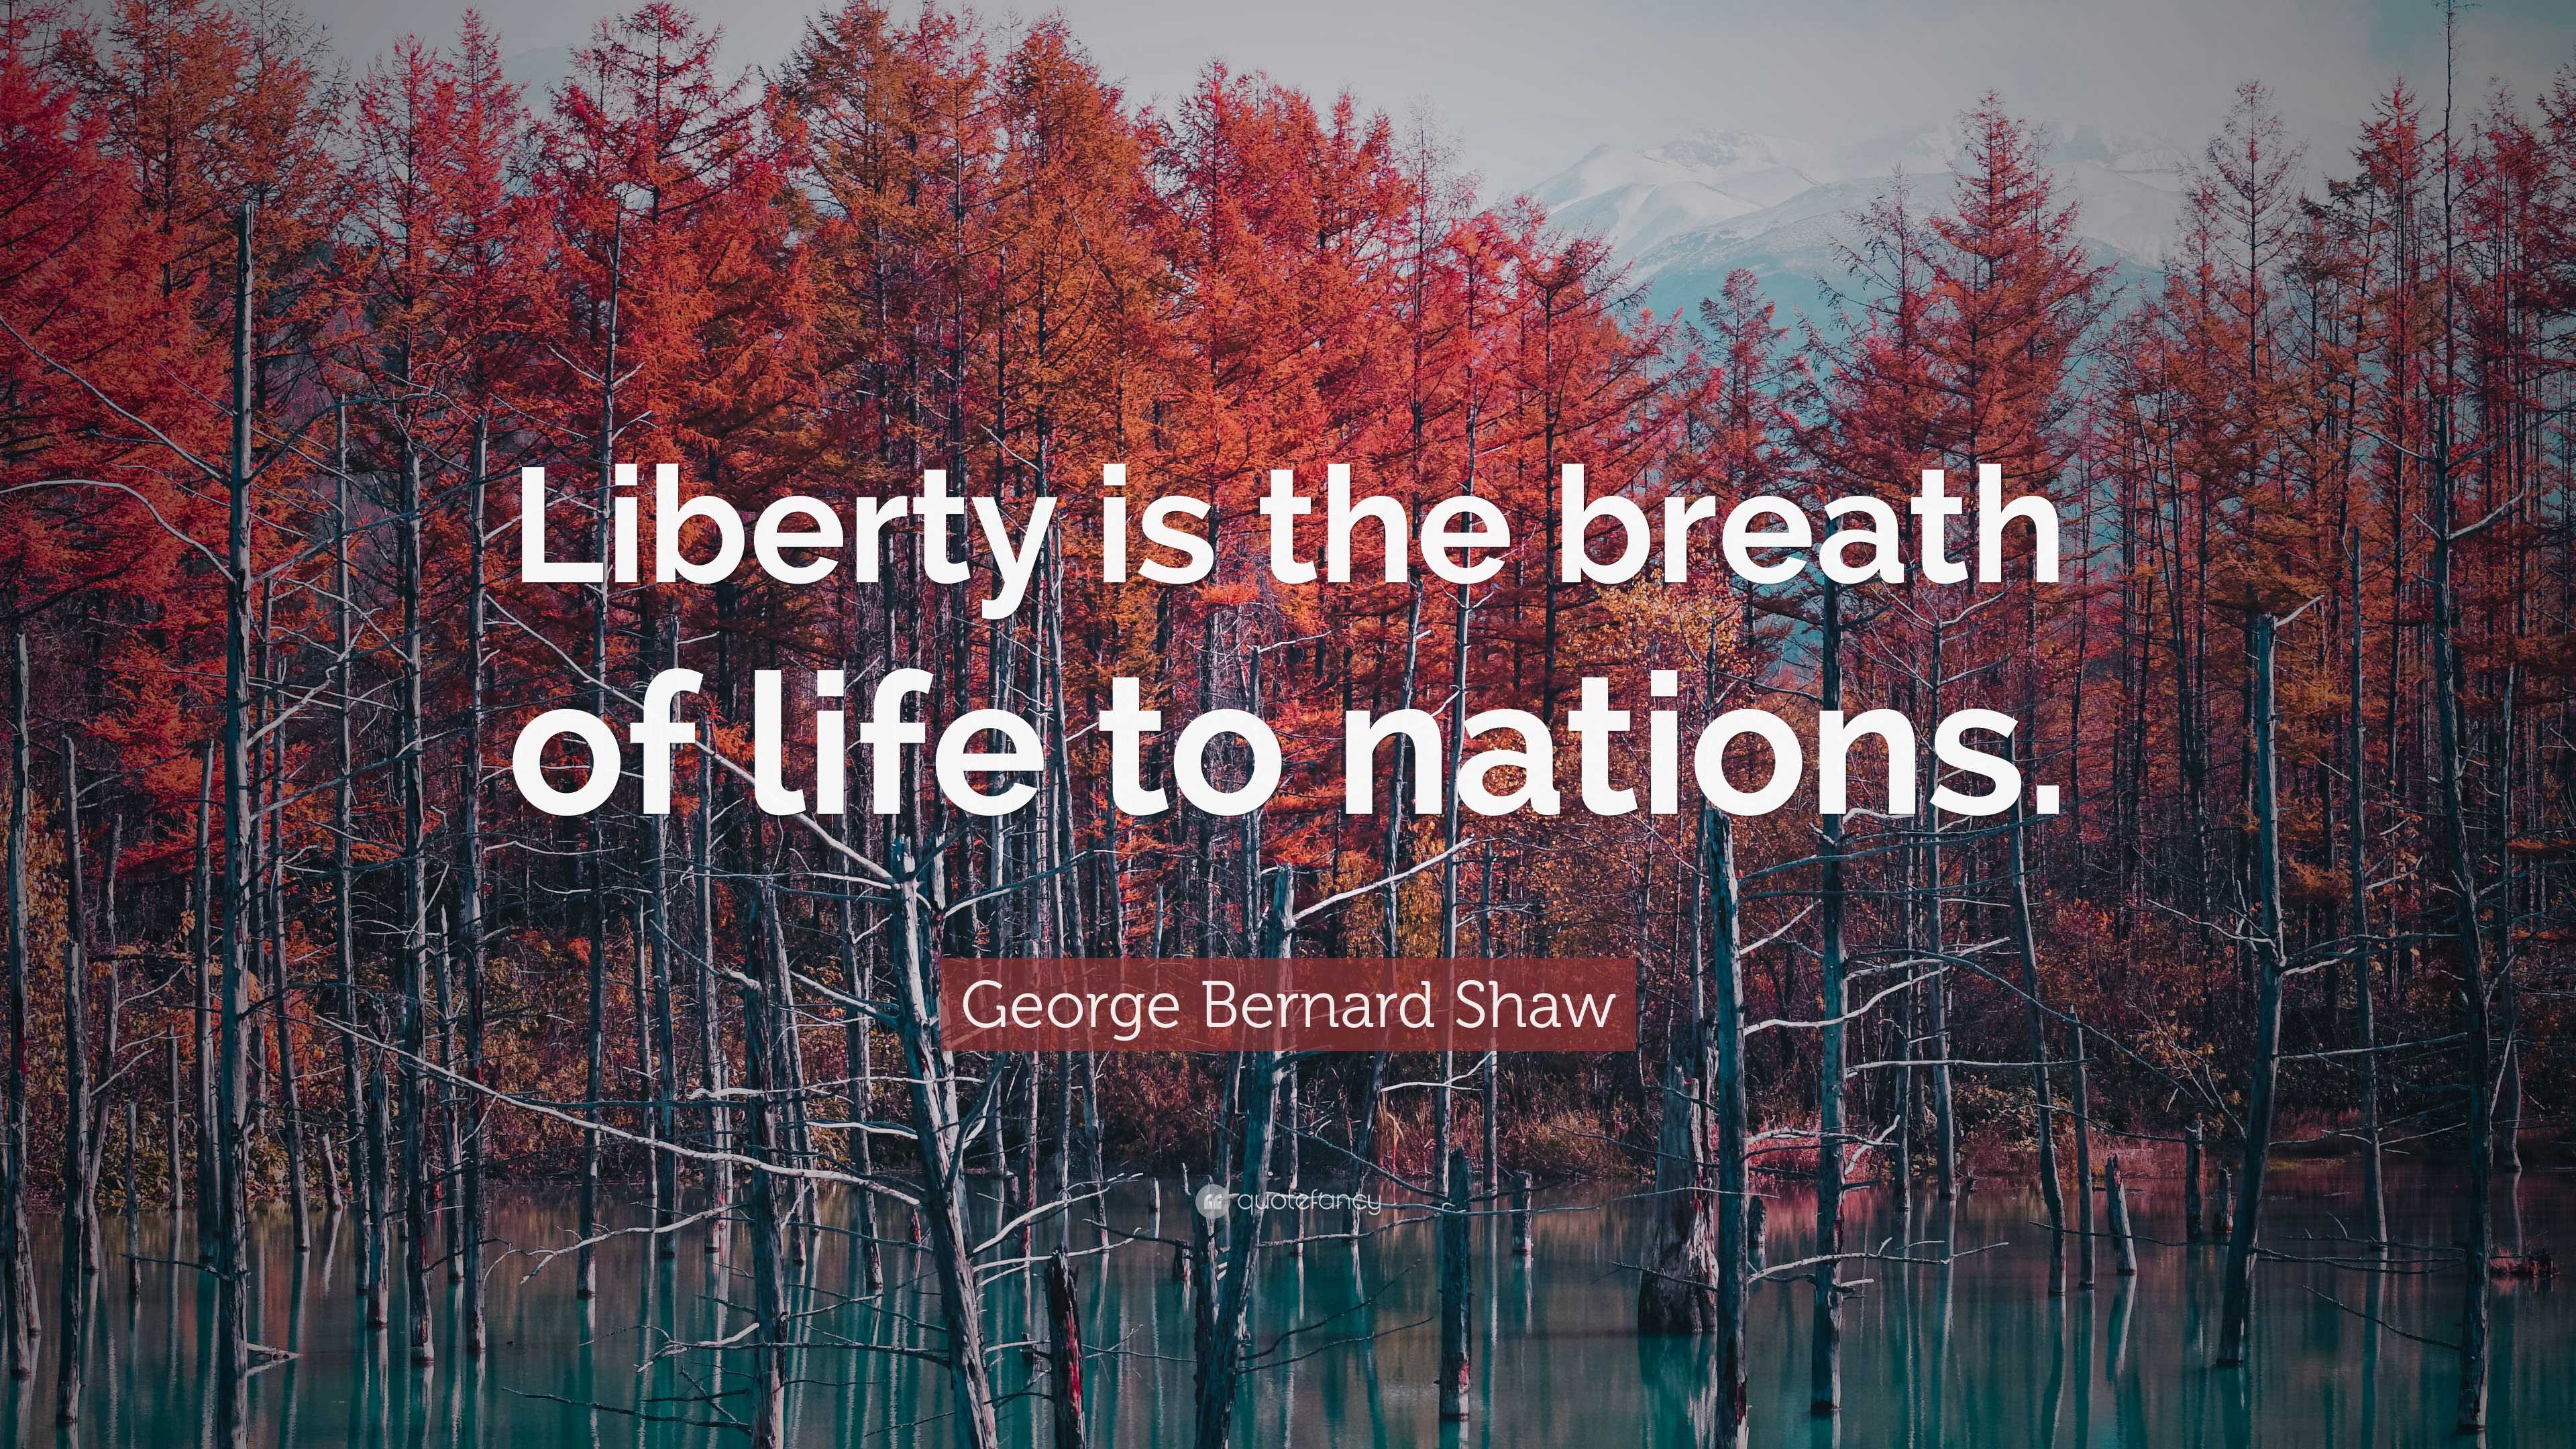 George Bernard Shaw Quote: “Liberty is the breath of life to nations.”